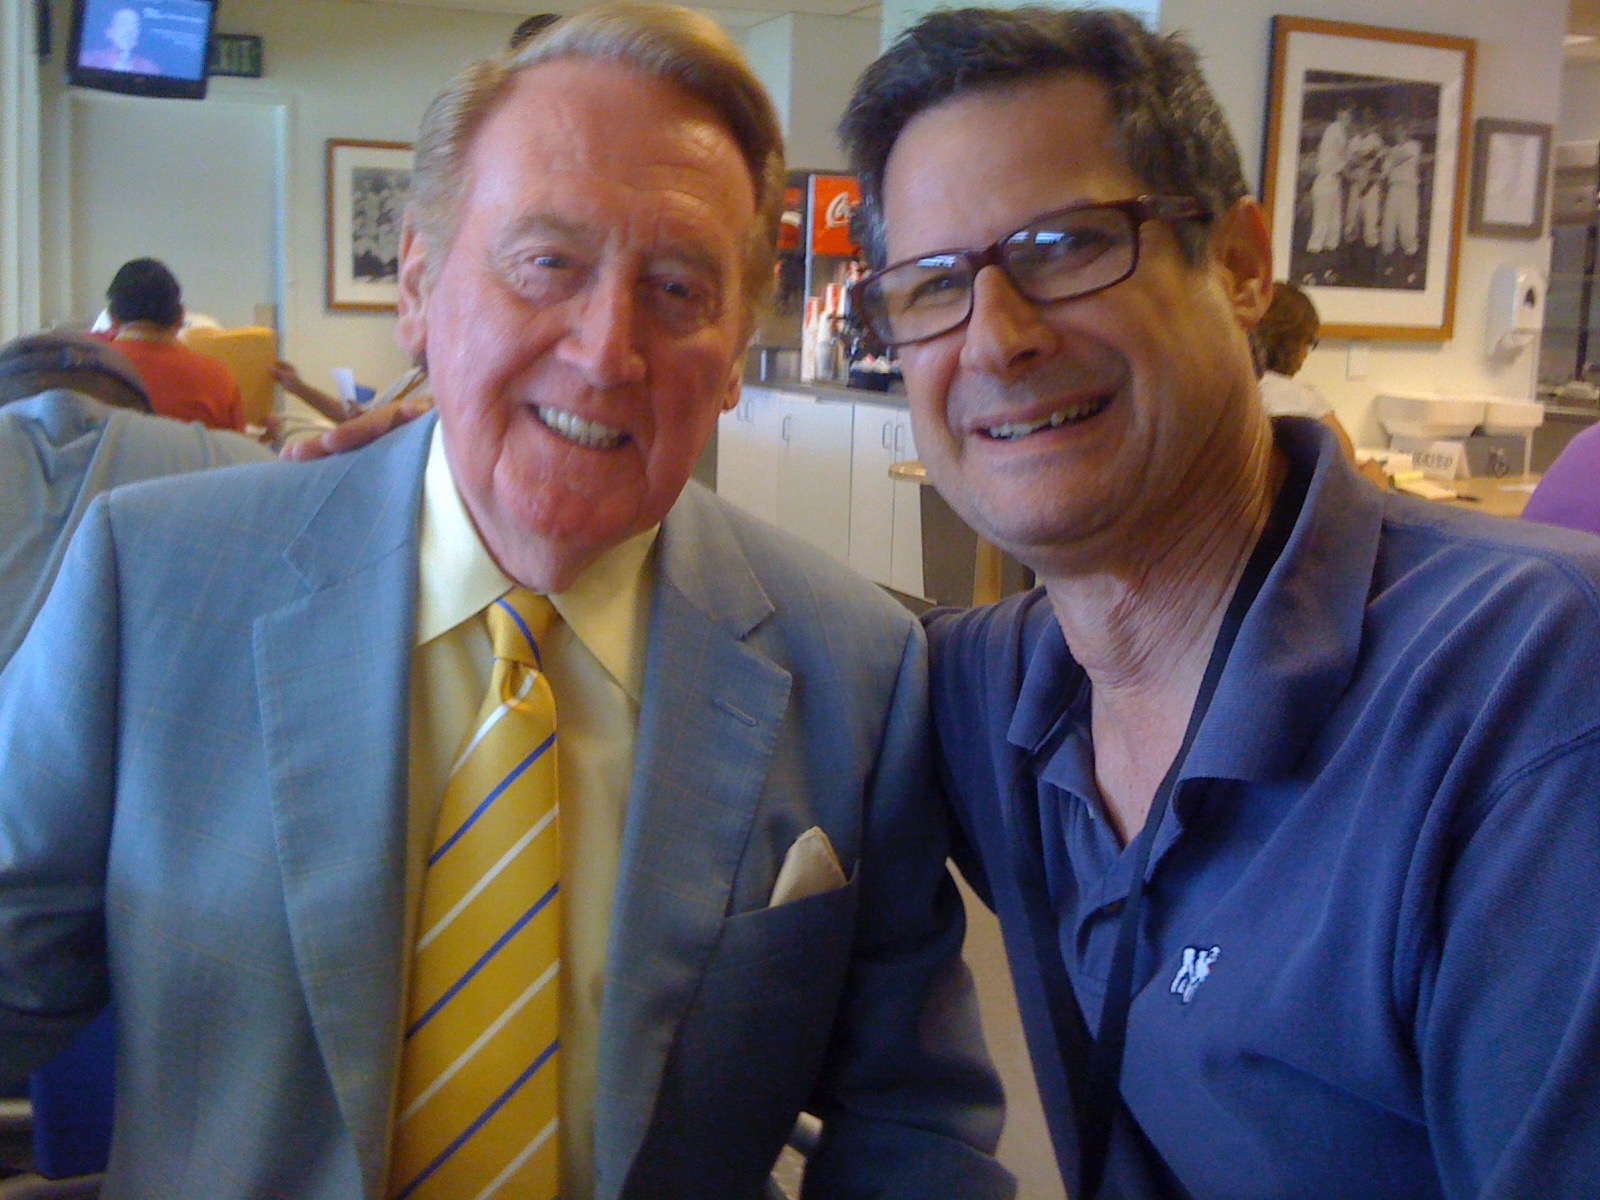 Remembering Vin Scully's '84 Tigers World Series Home Run Call